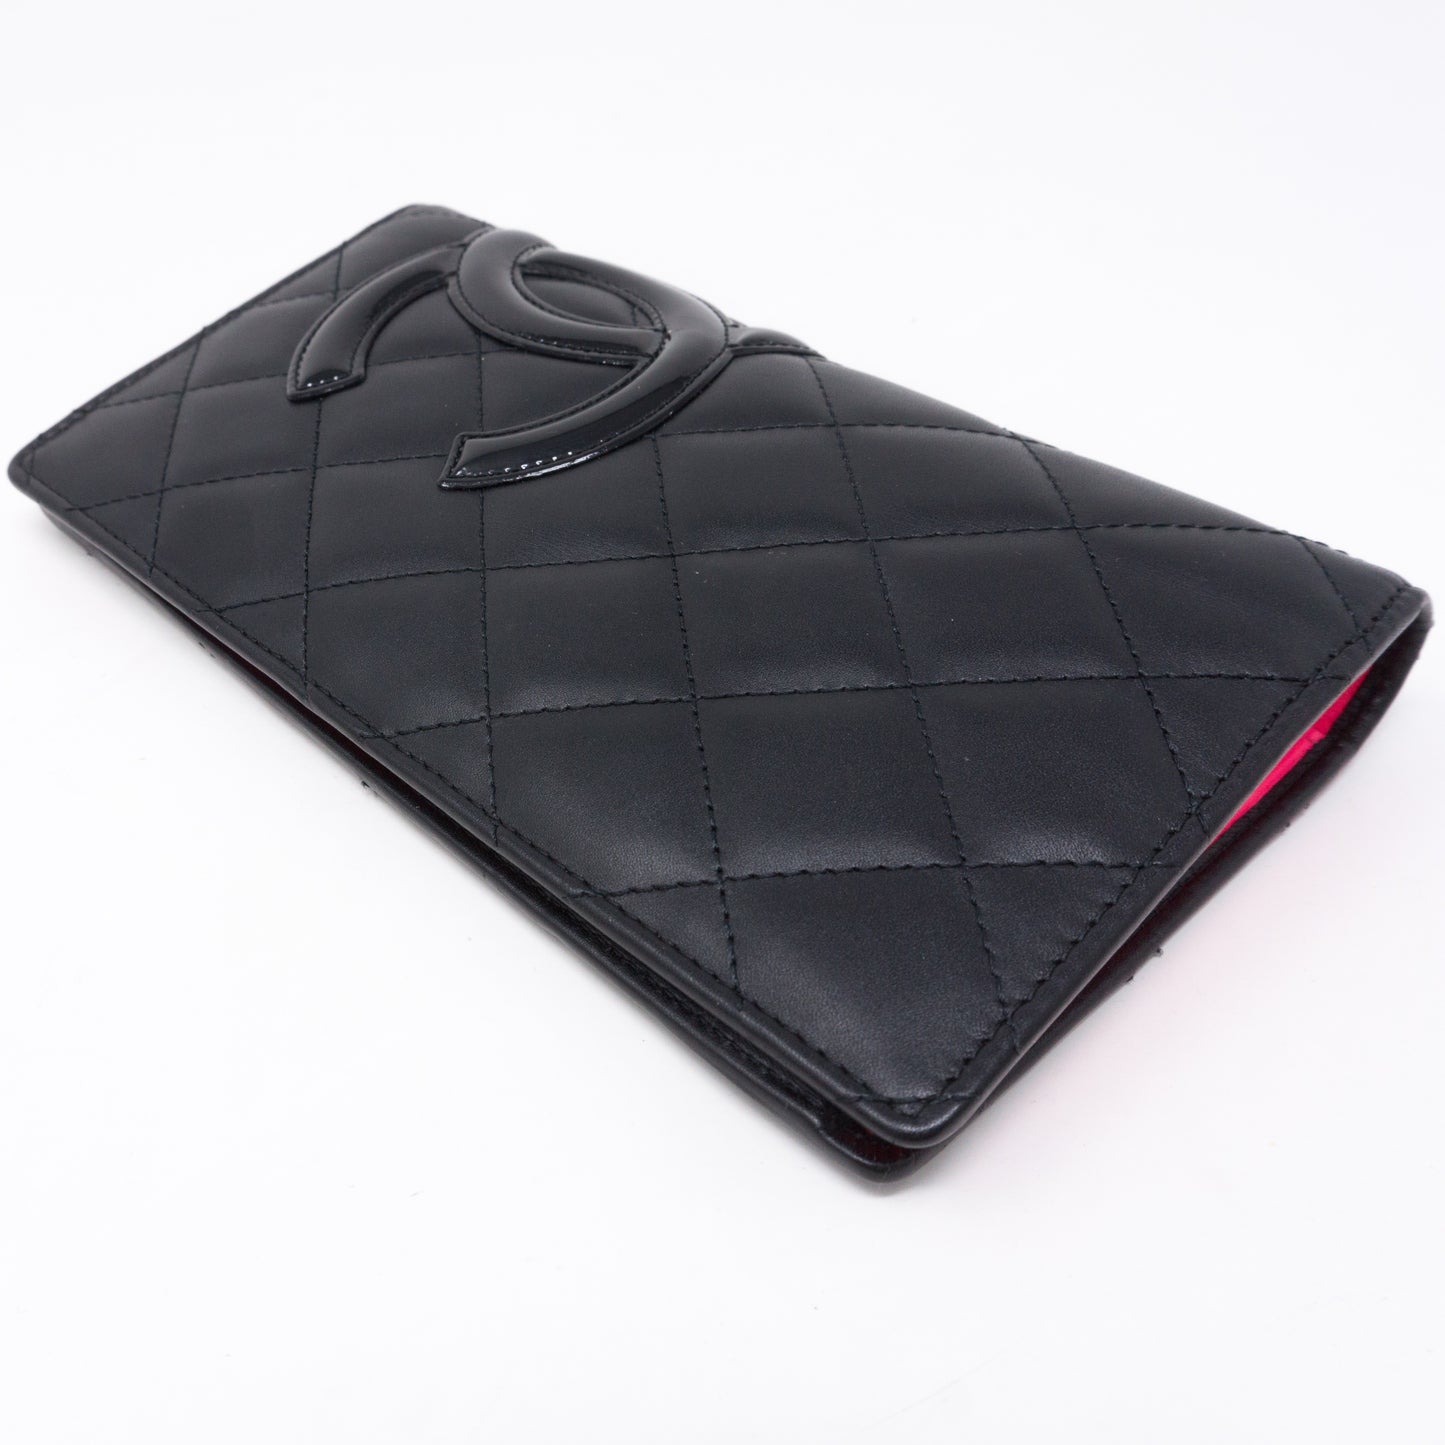 Cambon Classic Long Leather Wallet